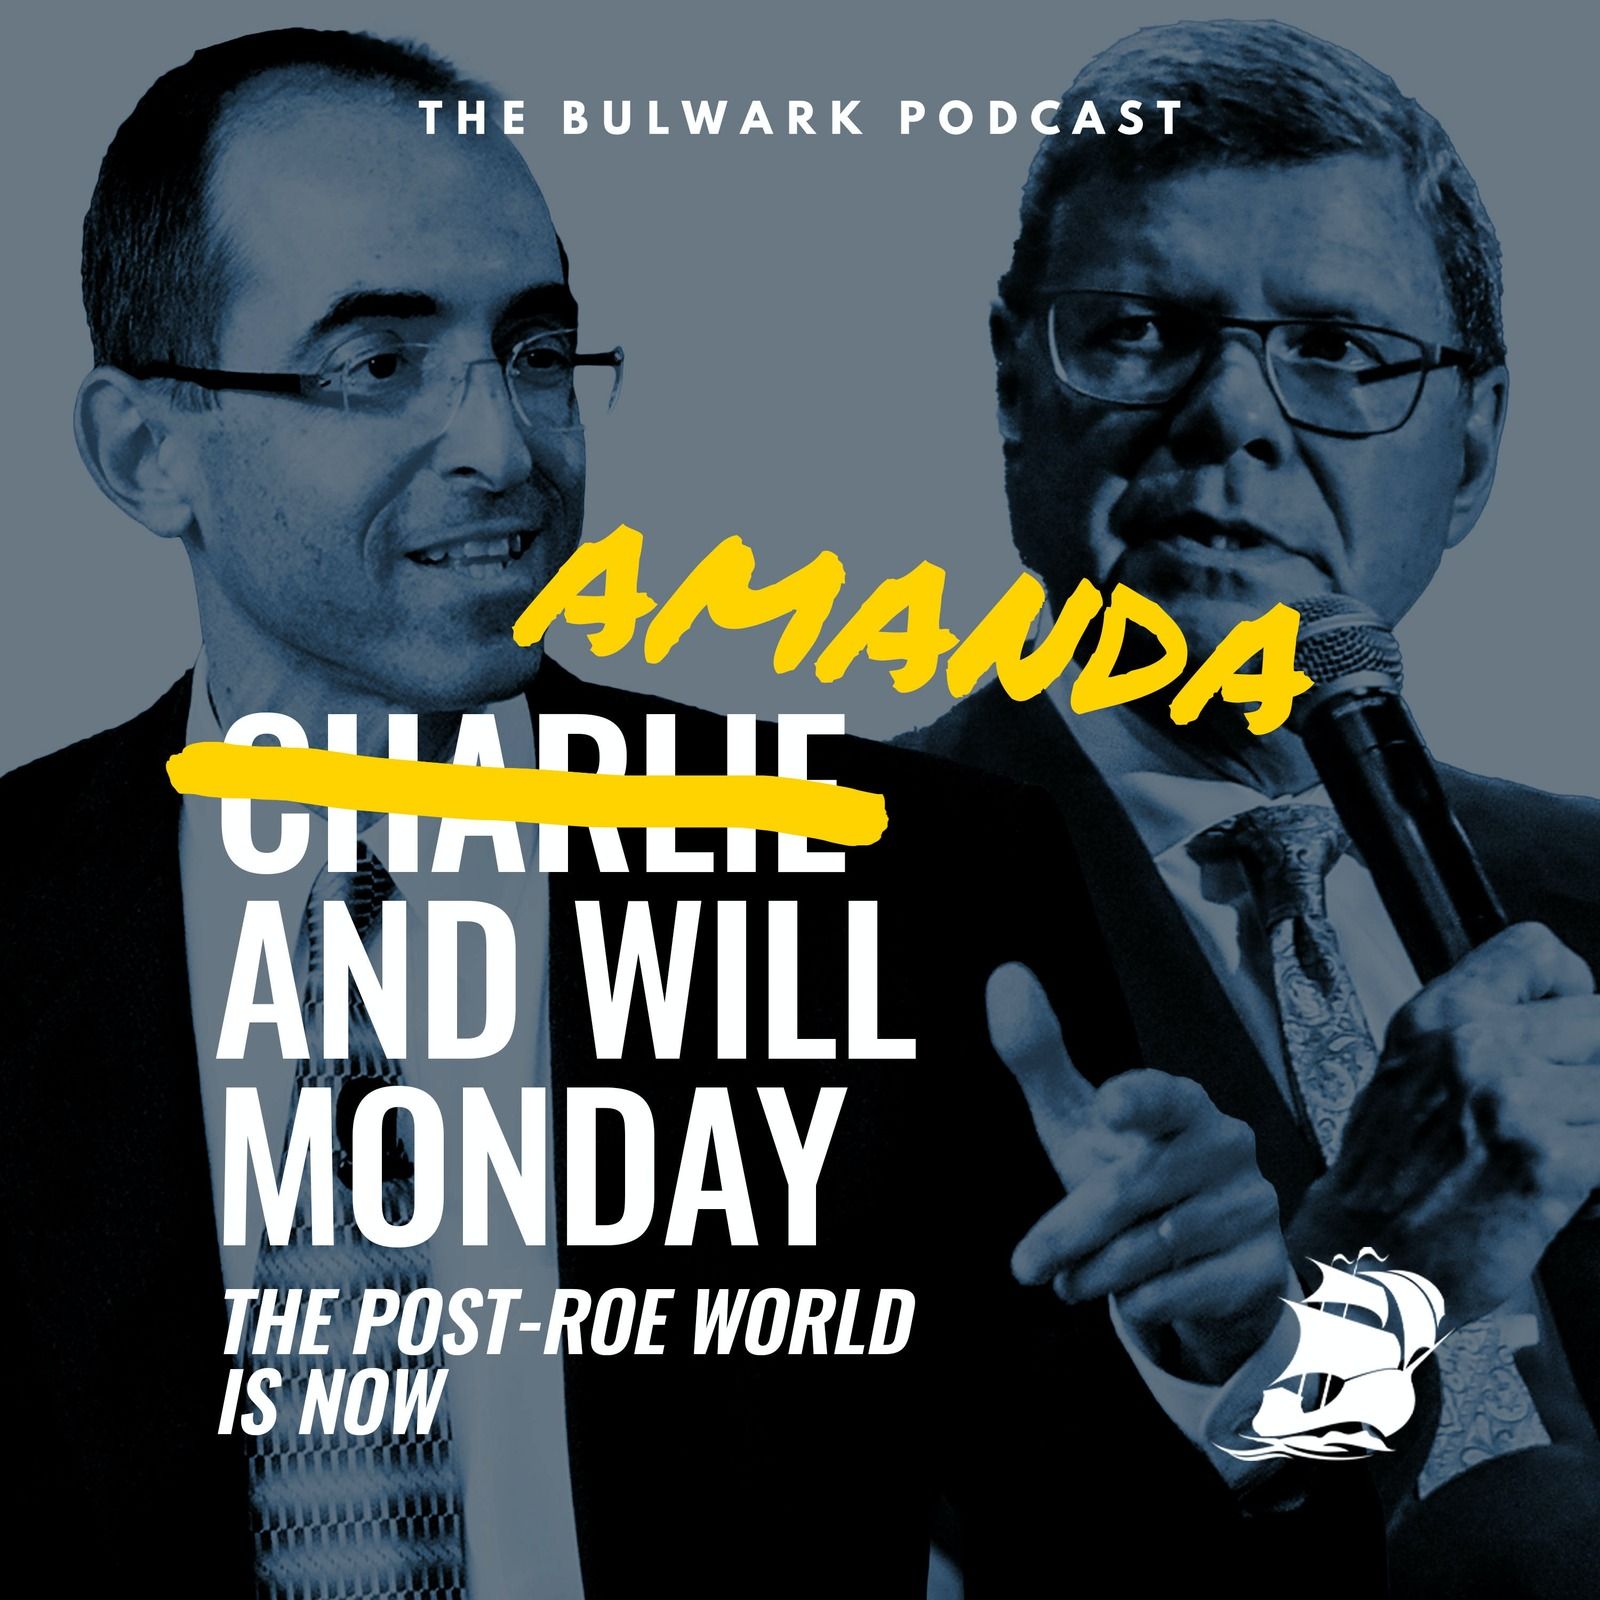 The Post-Roe World Is Now by The Bulwark Podcast